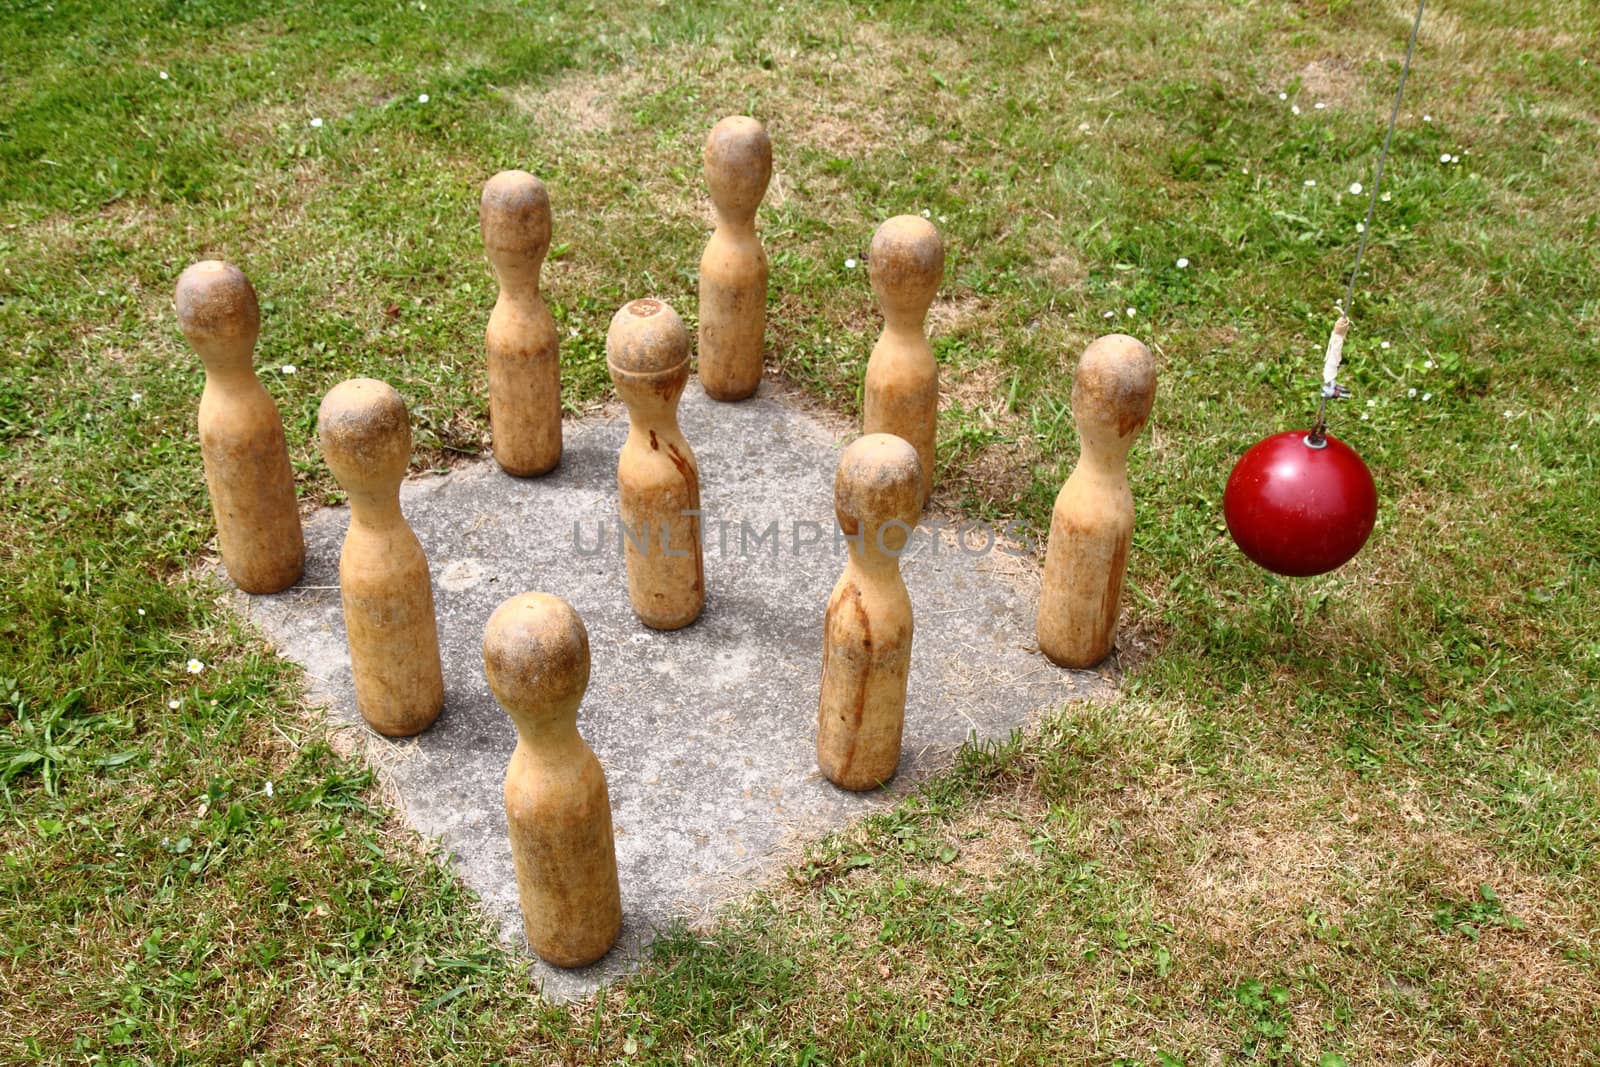 russian bowling as great relax sport activity